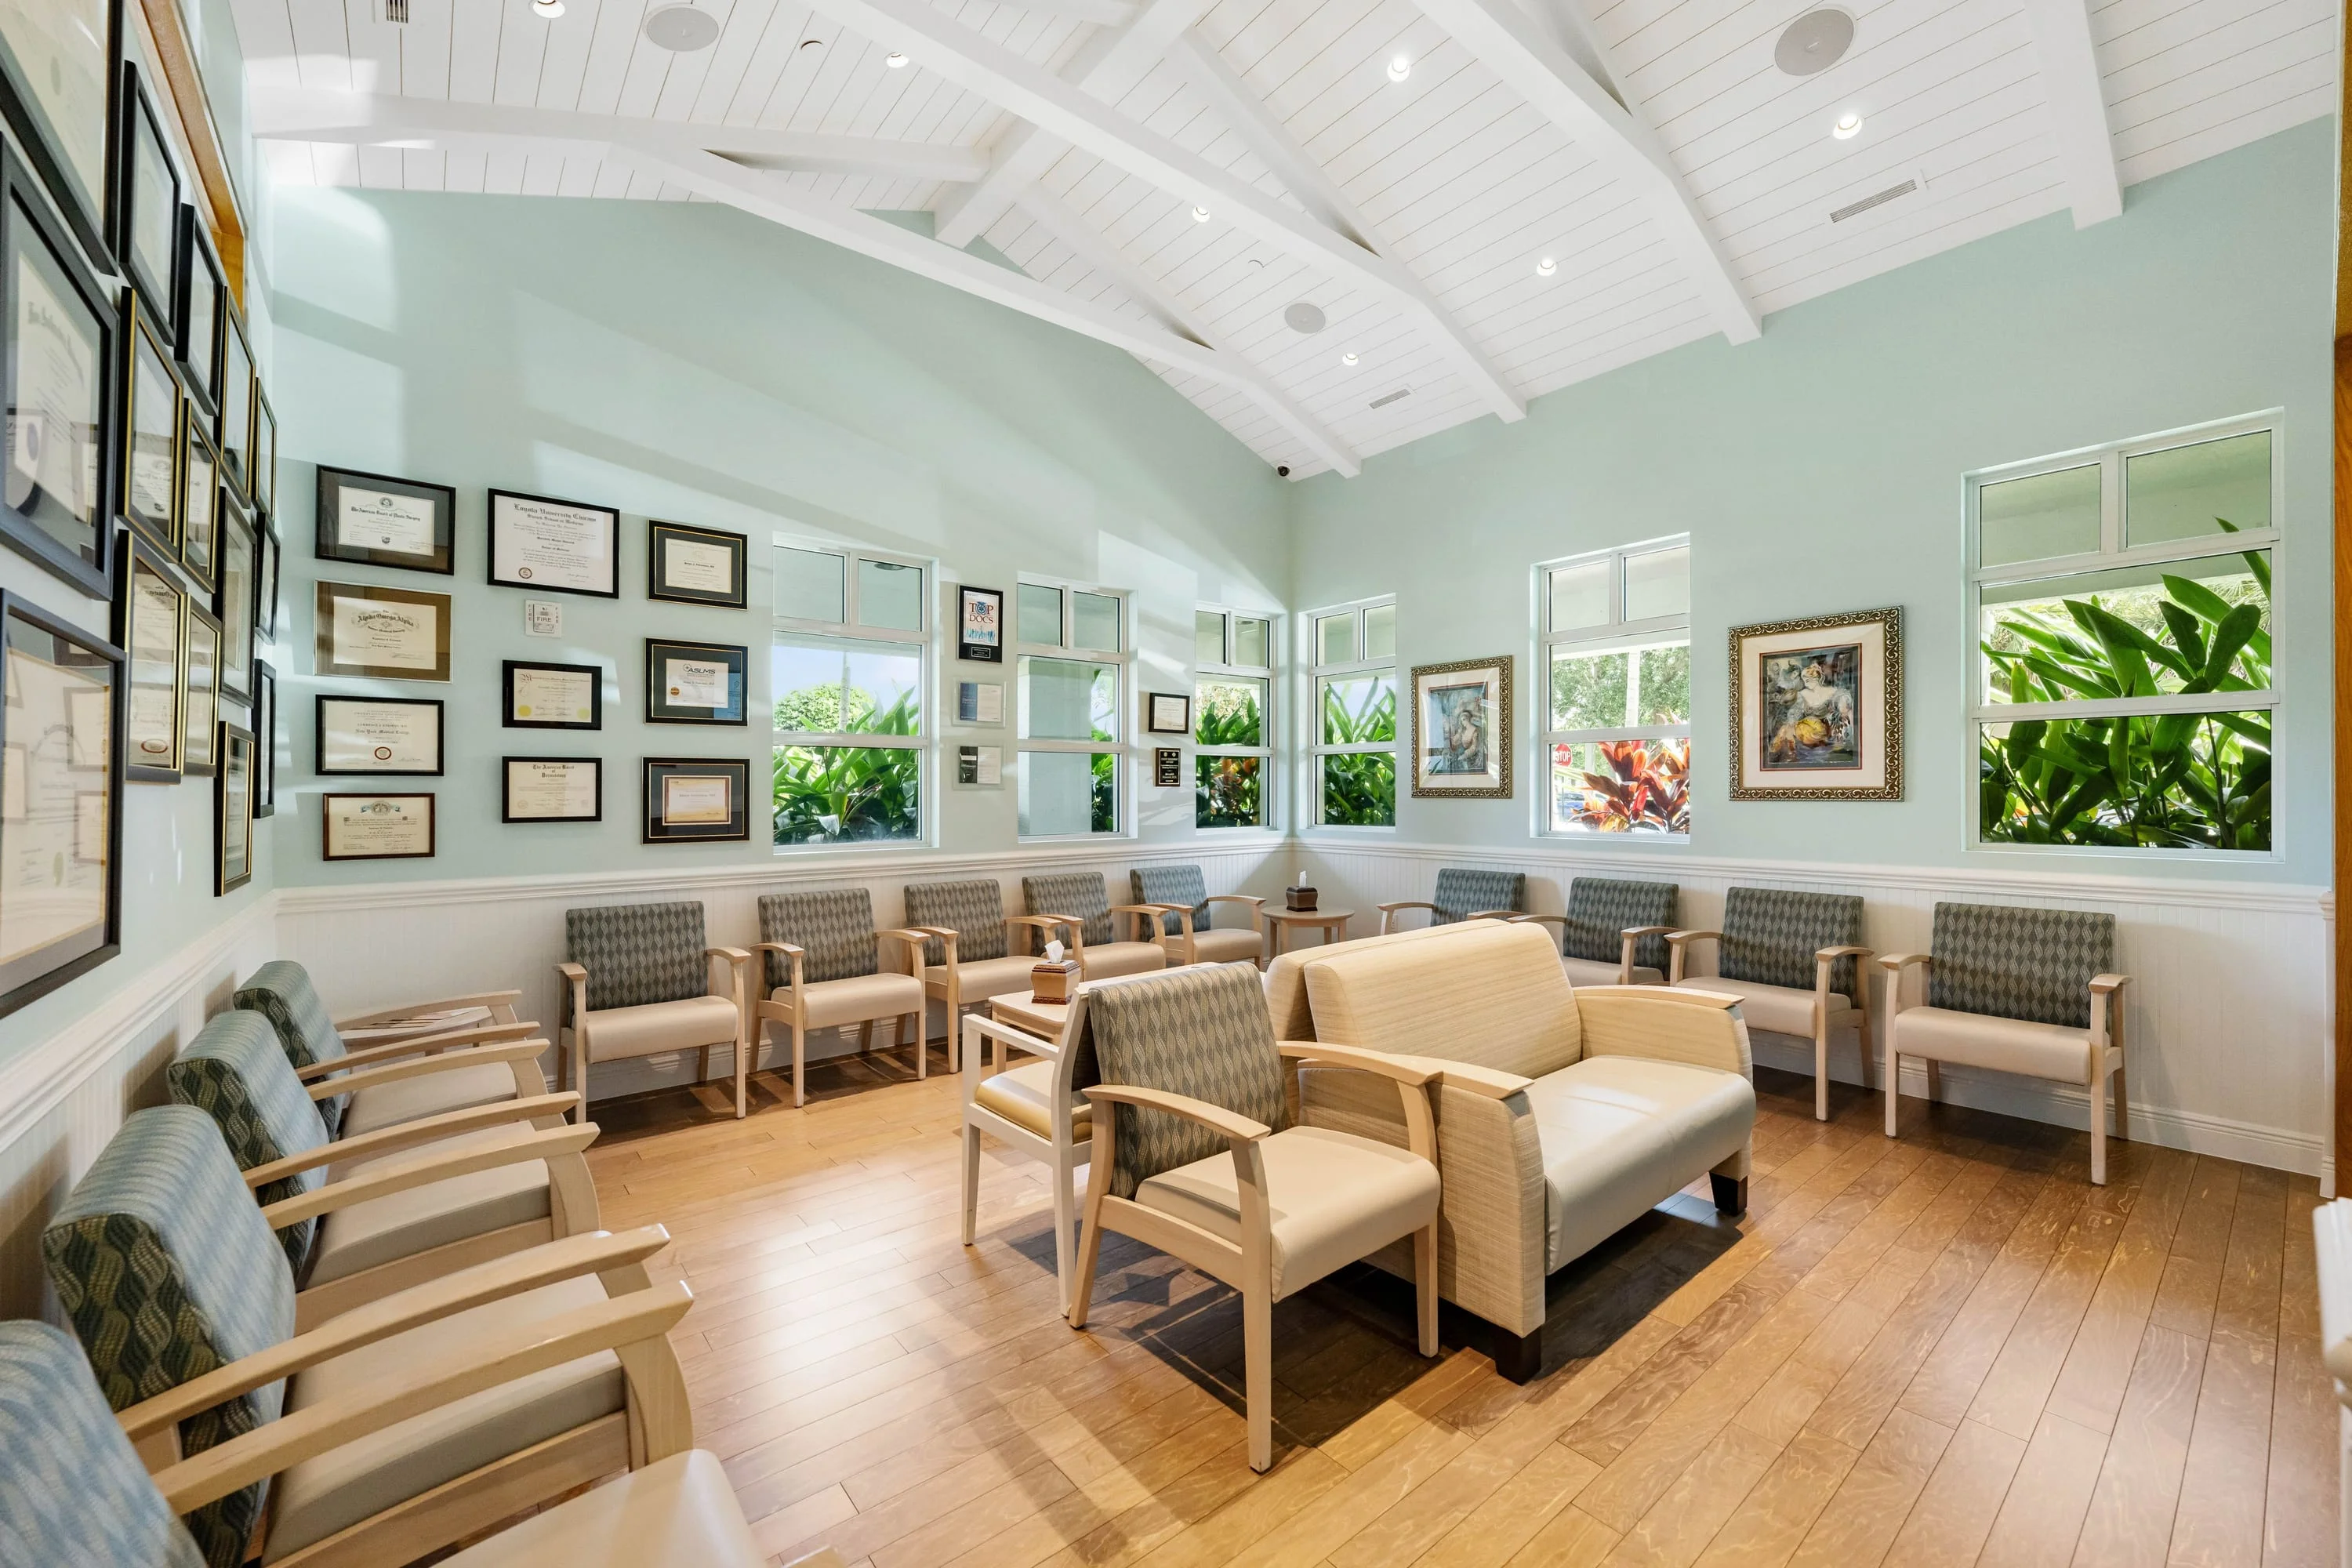 Feinstein Dermatology & Cosmetic Surgery - Your Trusted Dermatology Experts in Delray Beach, FL